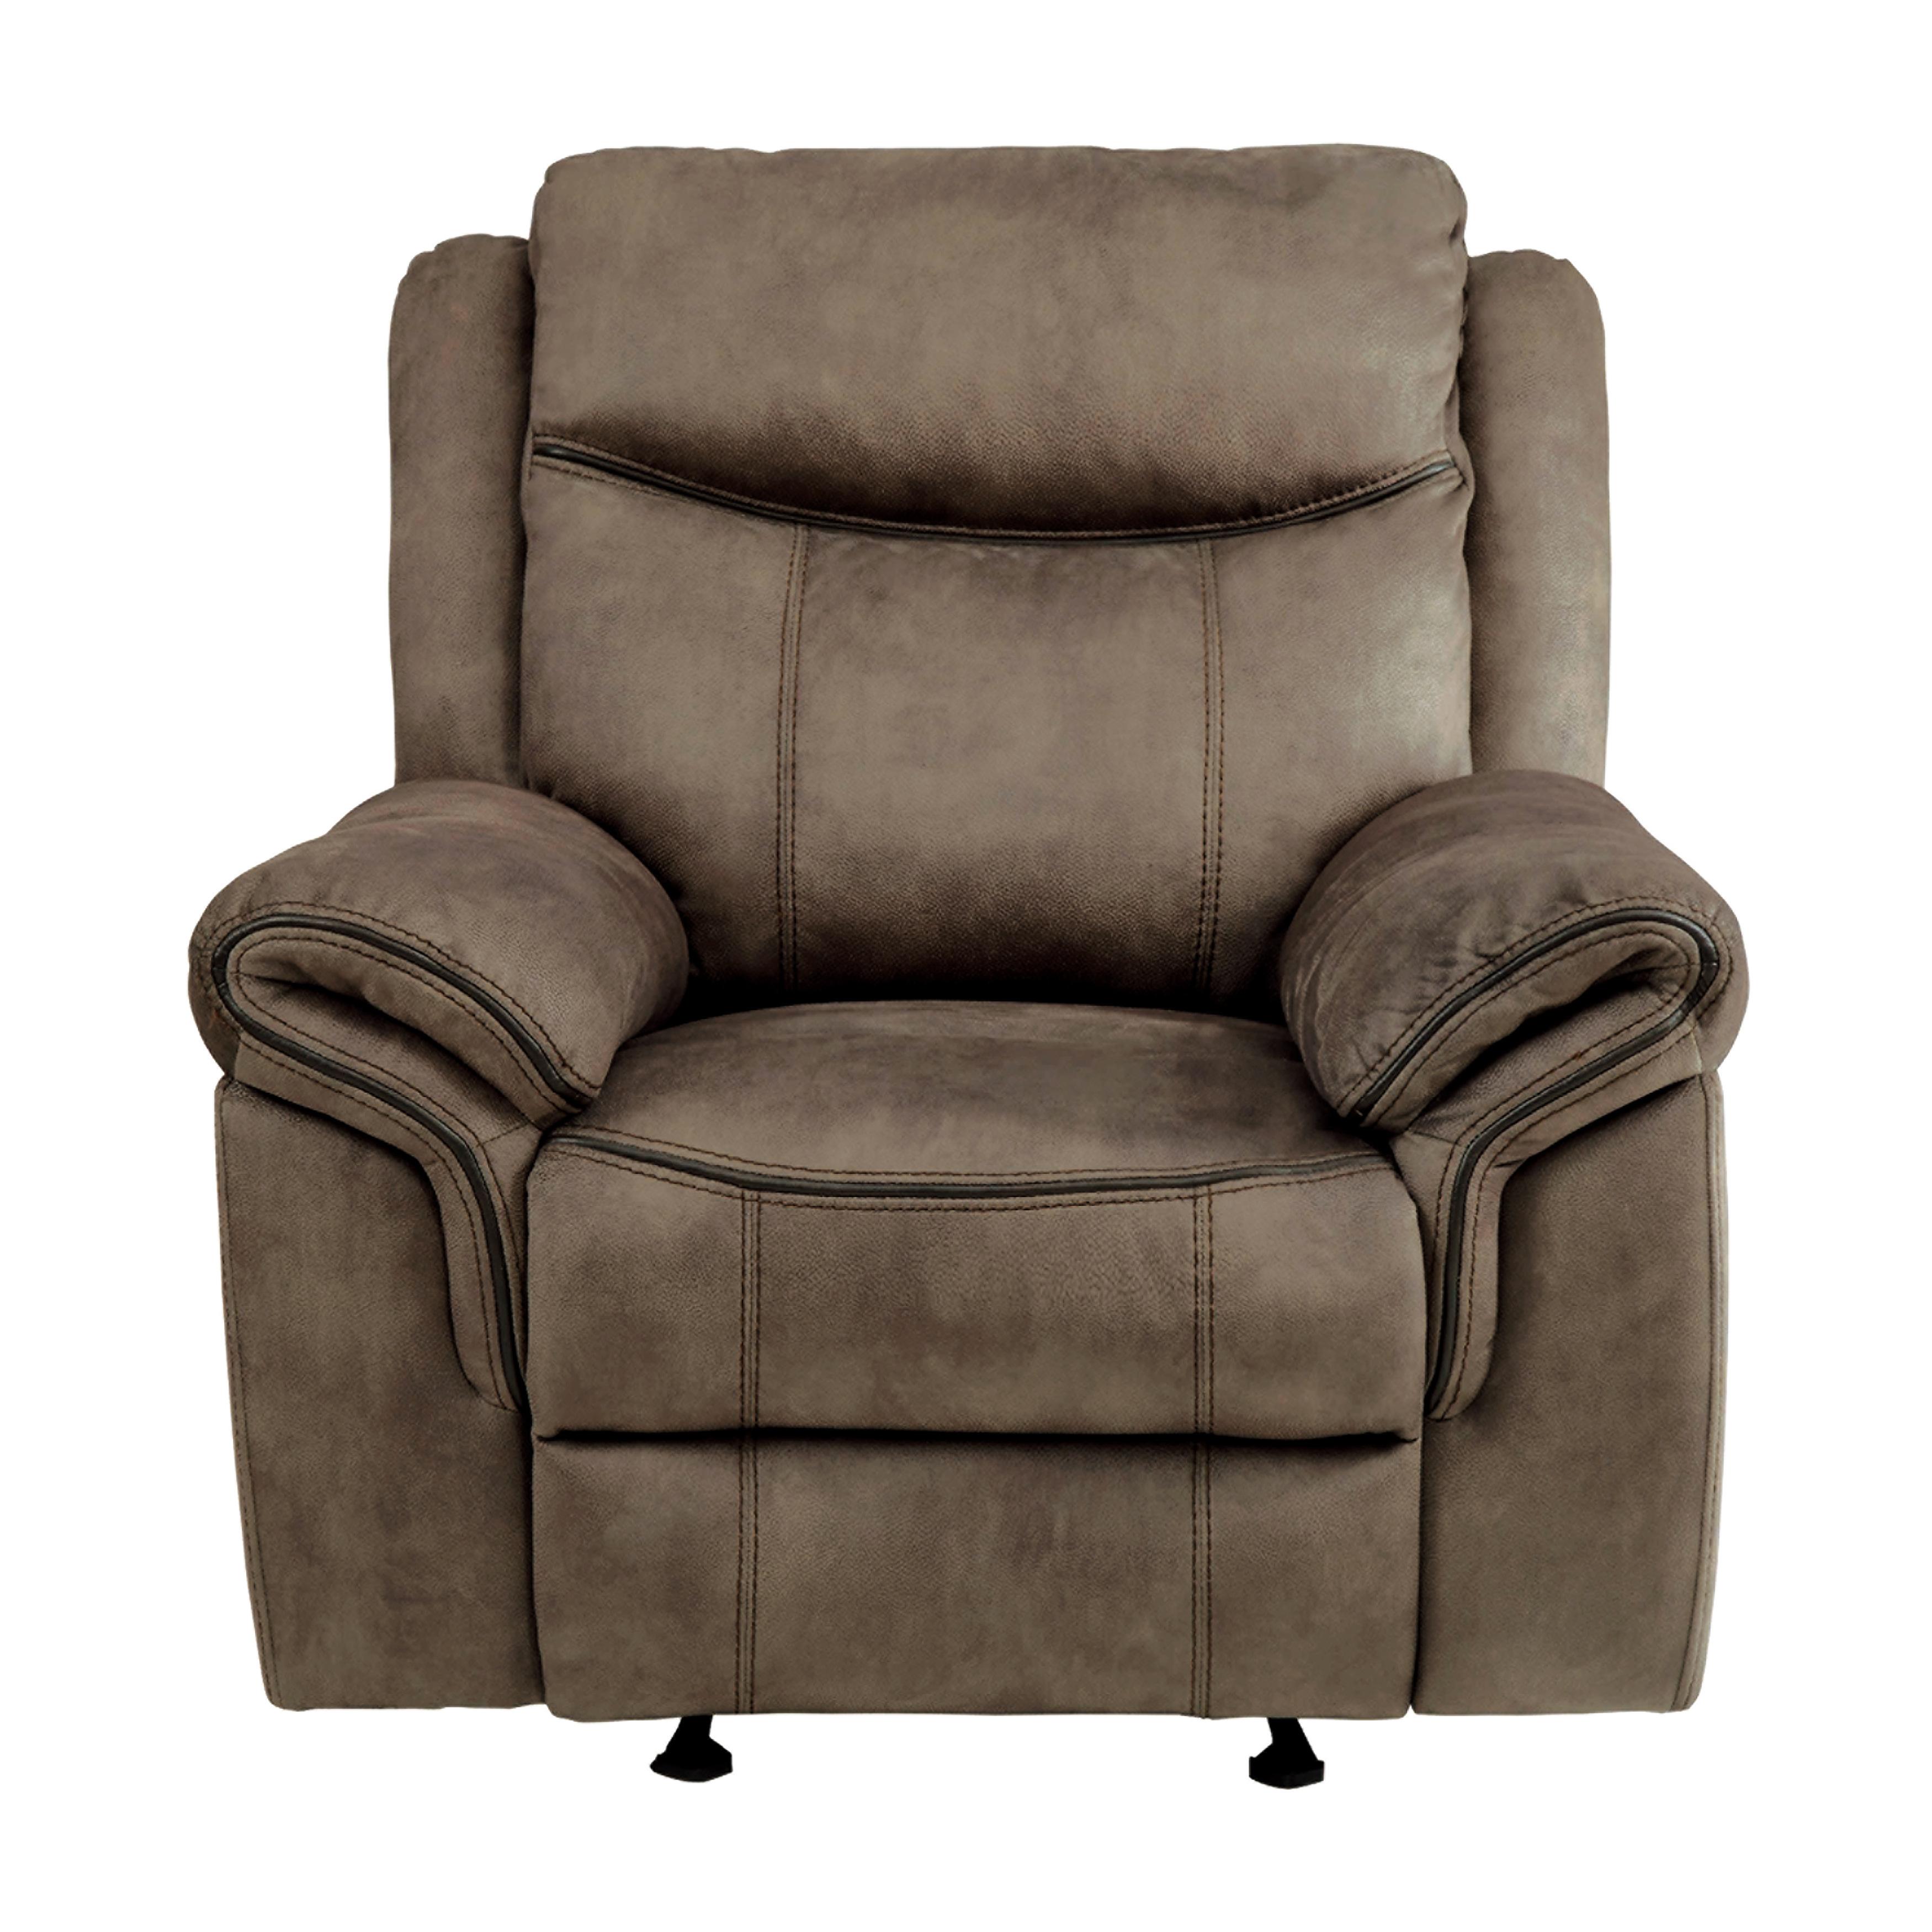 

    
Transitional Brown Faux Leather Reclining Chair Homelegance 8206NF-1 Aram
